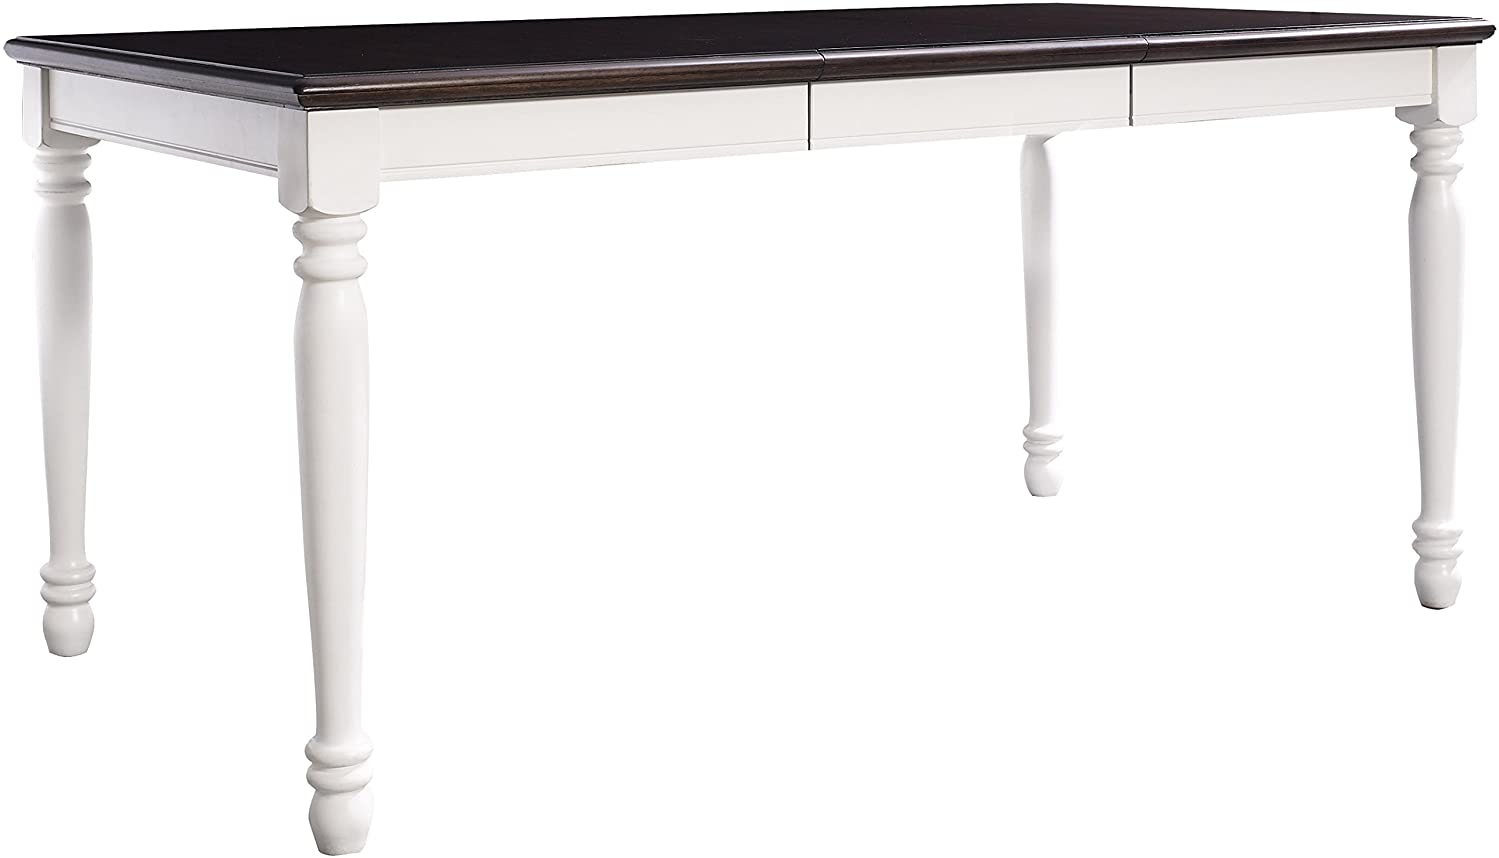 B01N8WP1A7 Crosley Furniture Shelby Expandable Dining Table, Distressed White